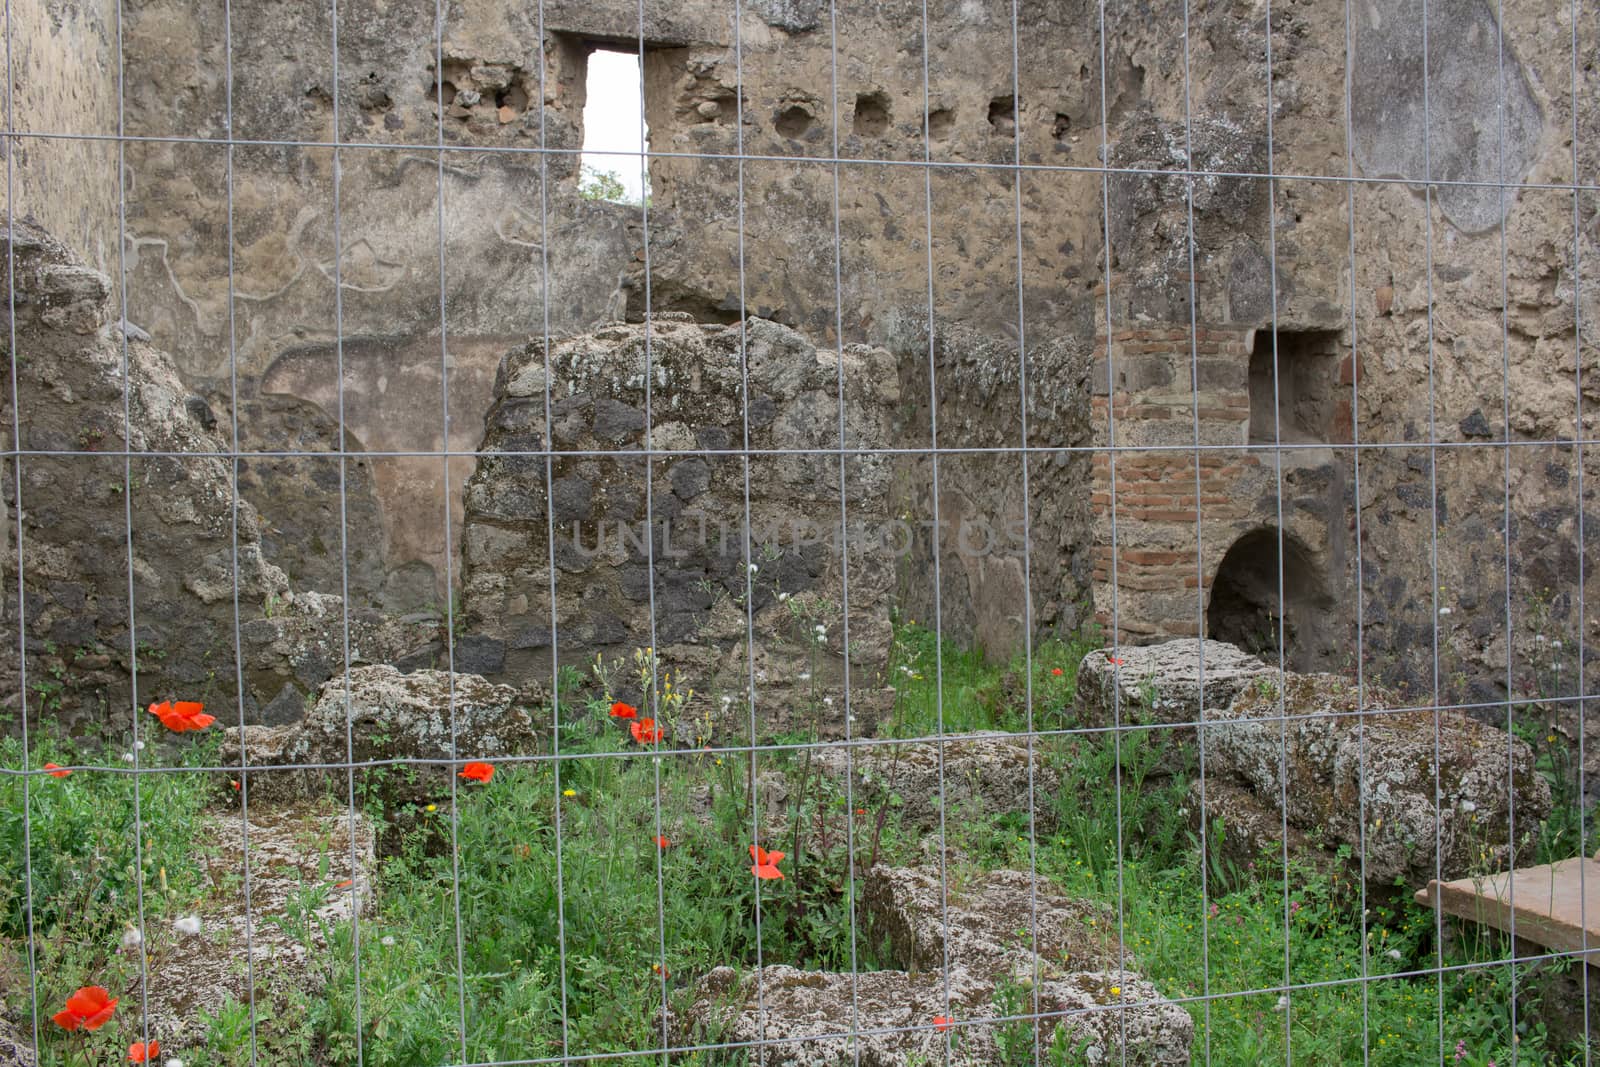 Red tulip poppy flowers blossom in meadow grass under old ancient ruined stone walls